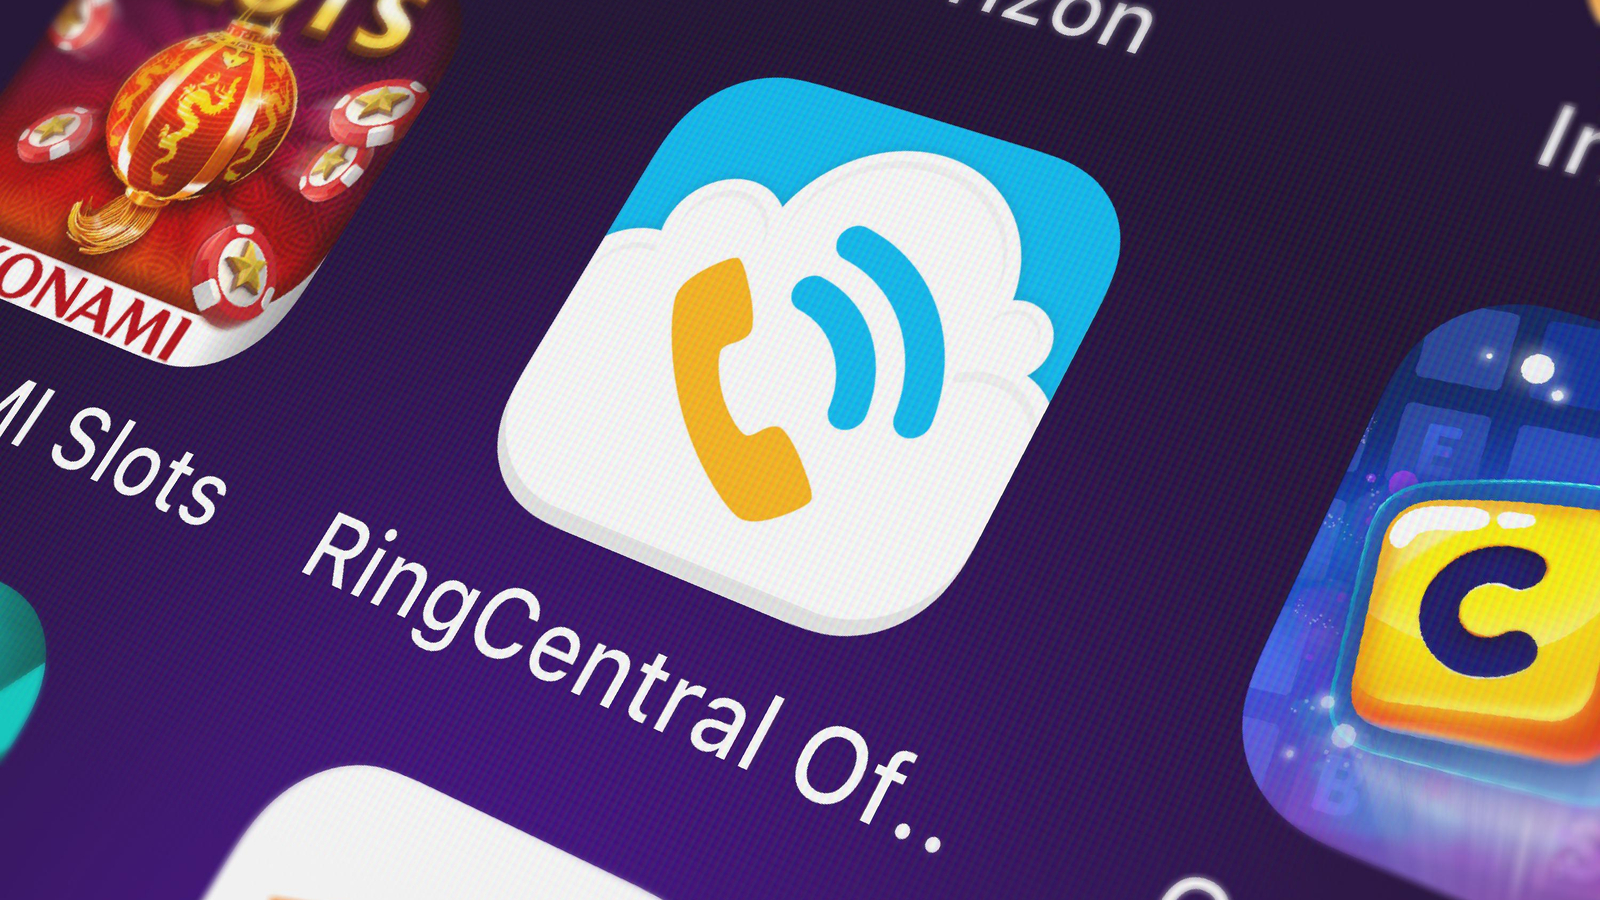 The RingCentral (RNG) mobile app is displayed on a smartphone screen.